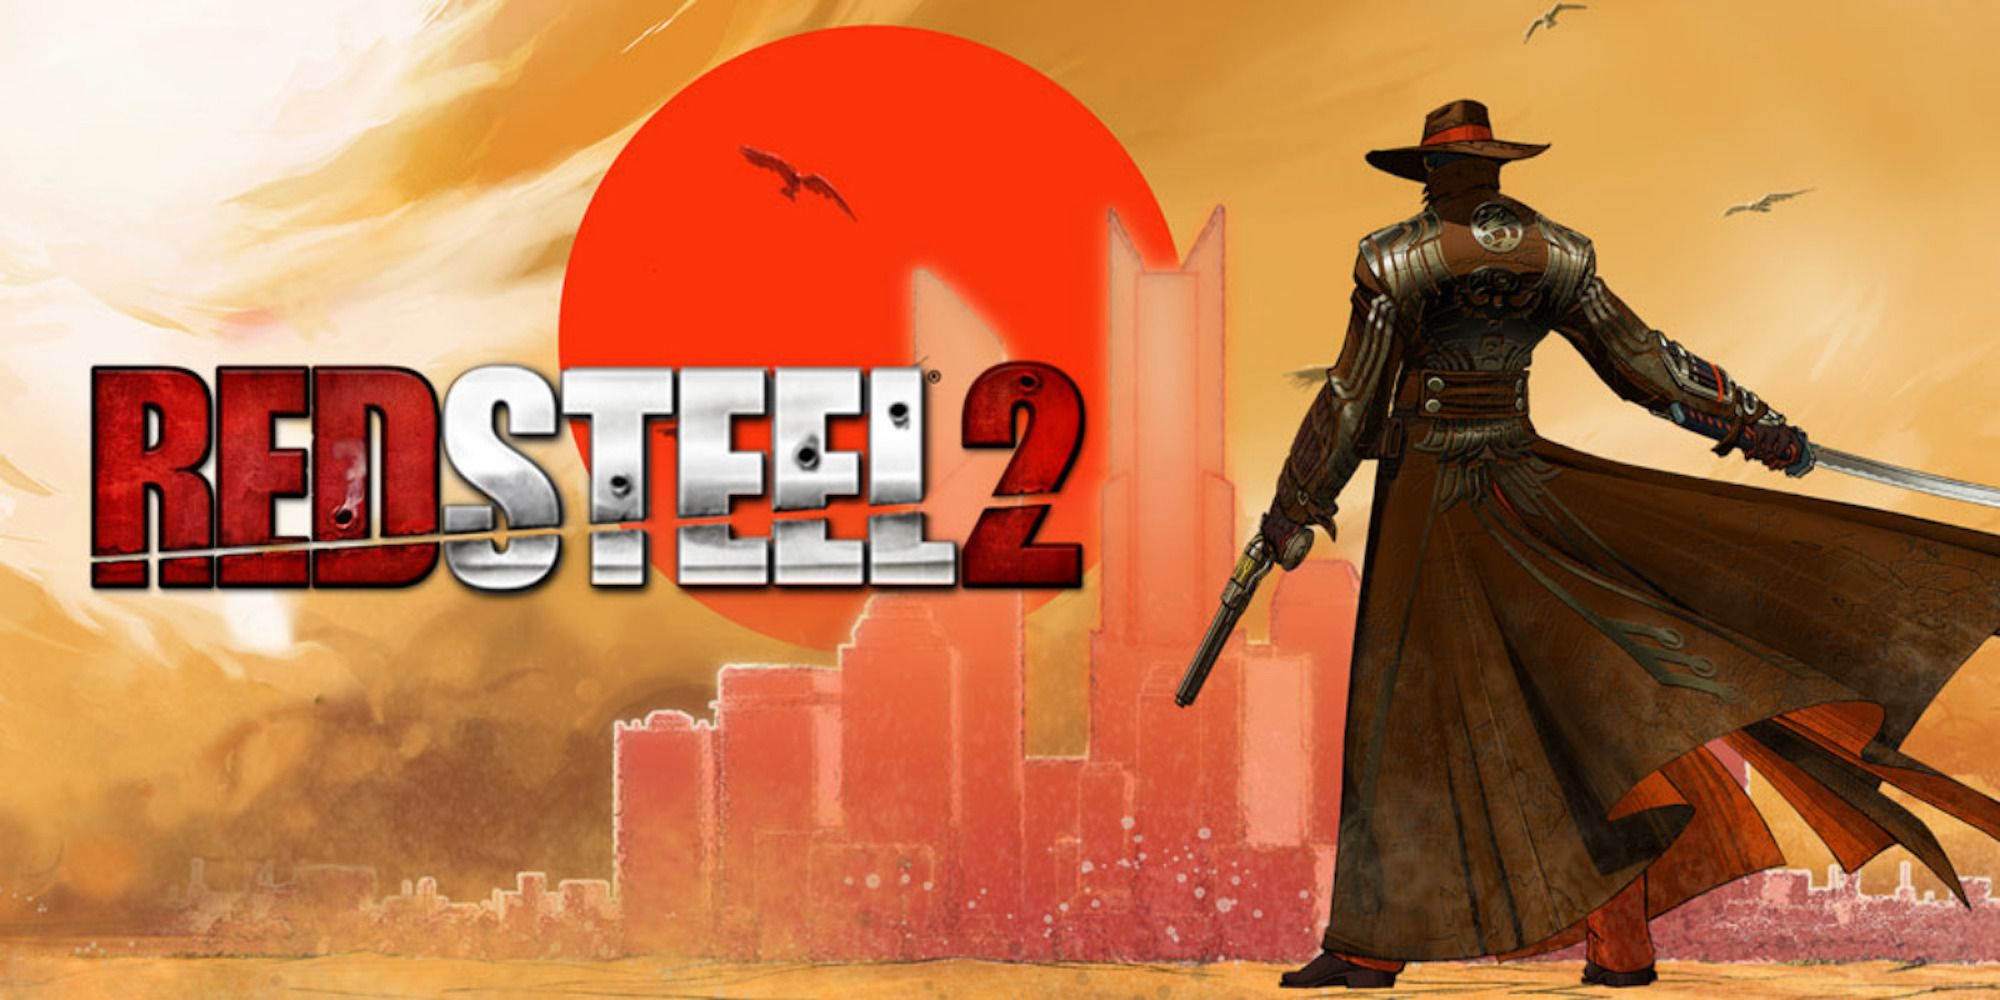 Promo art featuring the main character from Red Steel 2